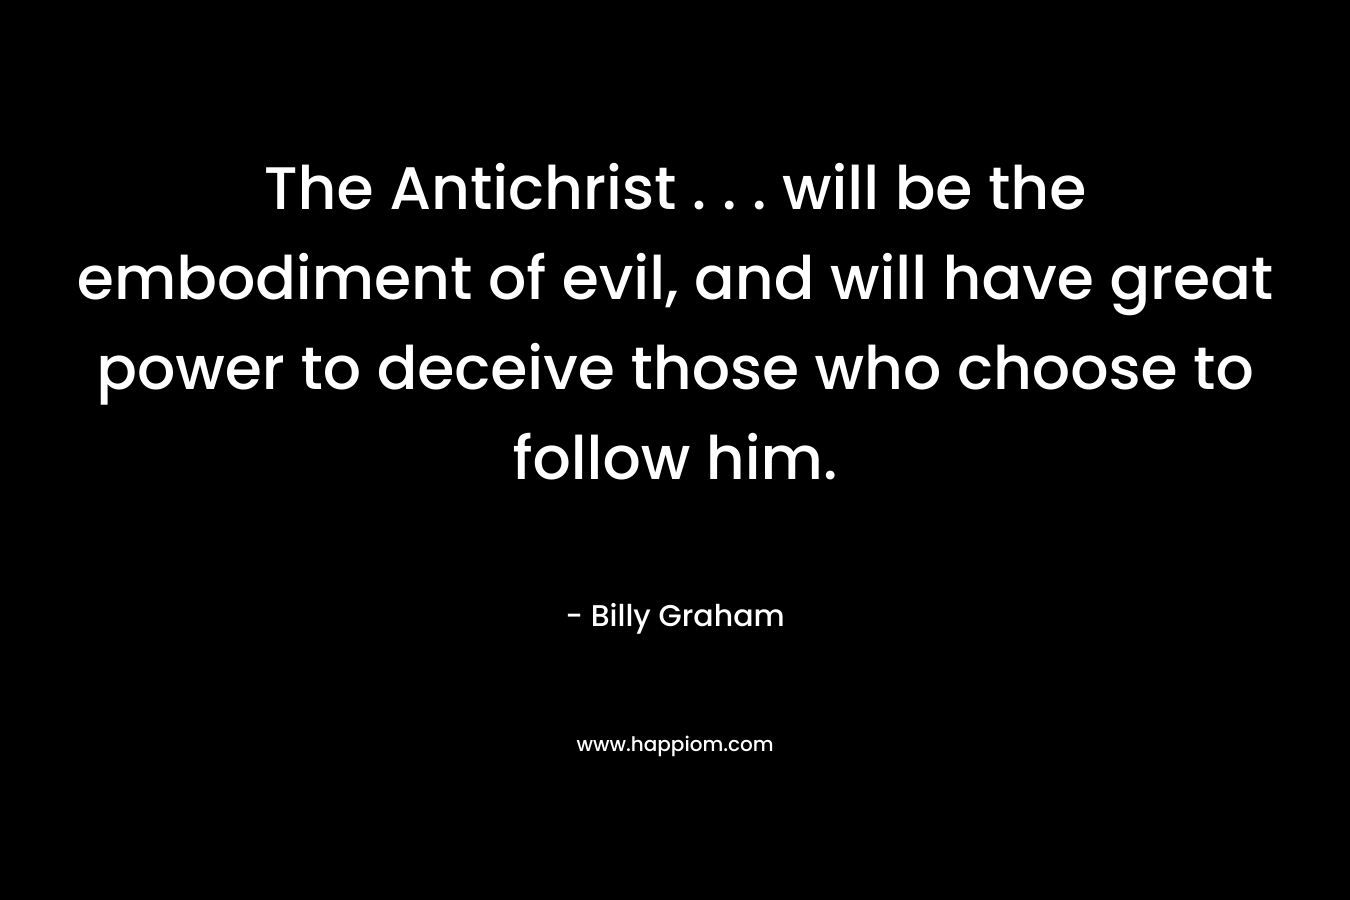 The Antichrist . . . will be the embodiment of evil, and will have great power to deceive those who choose to follow him.